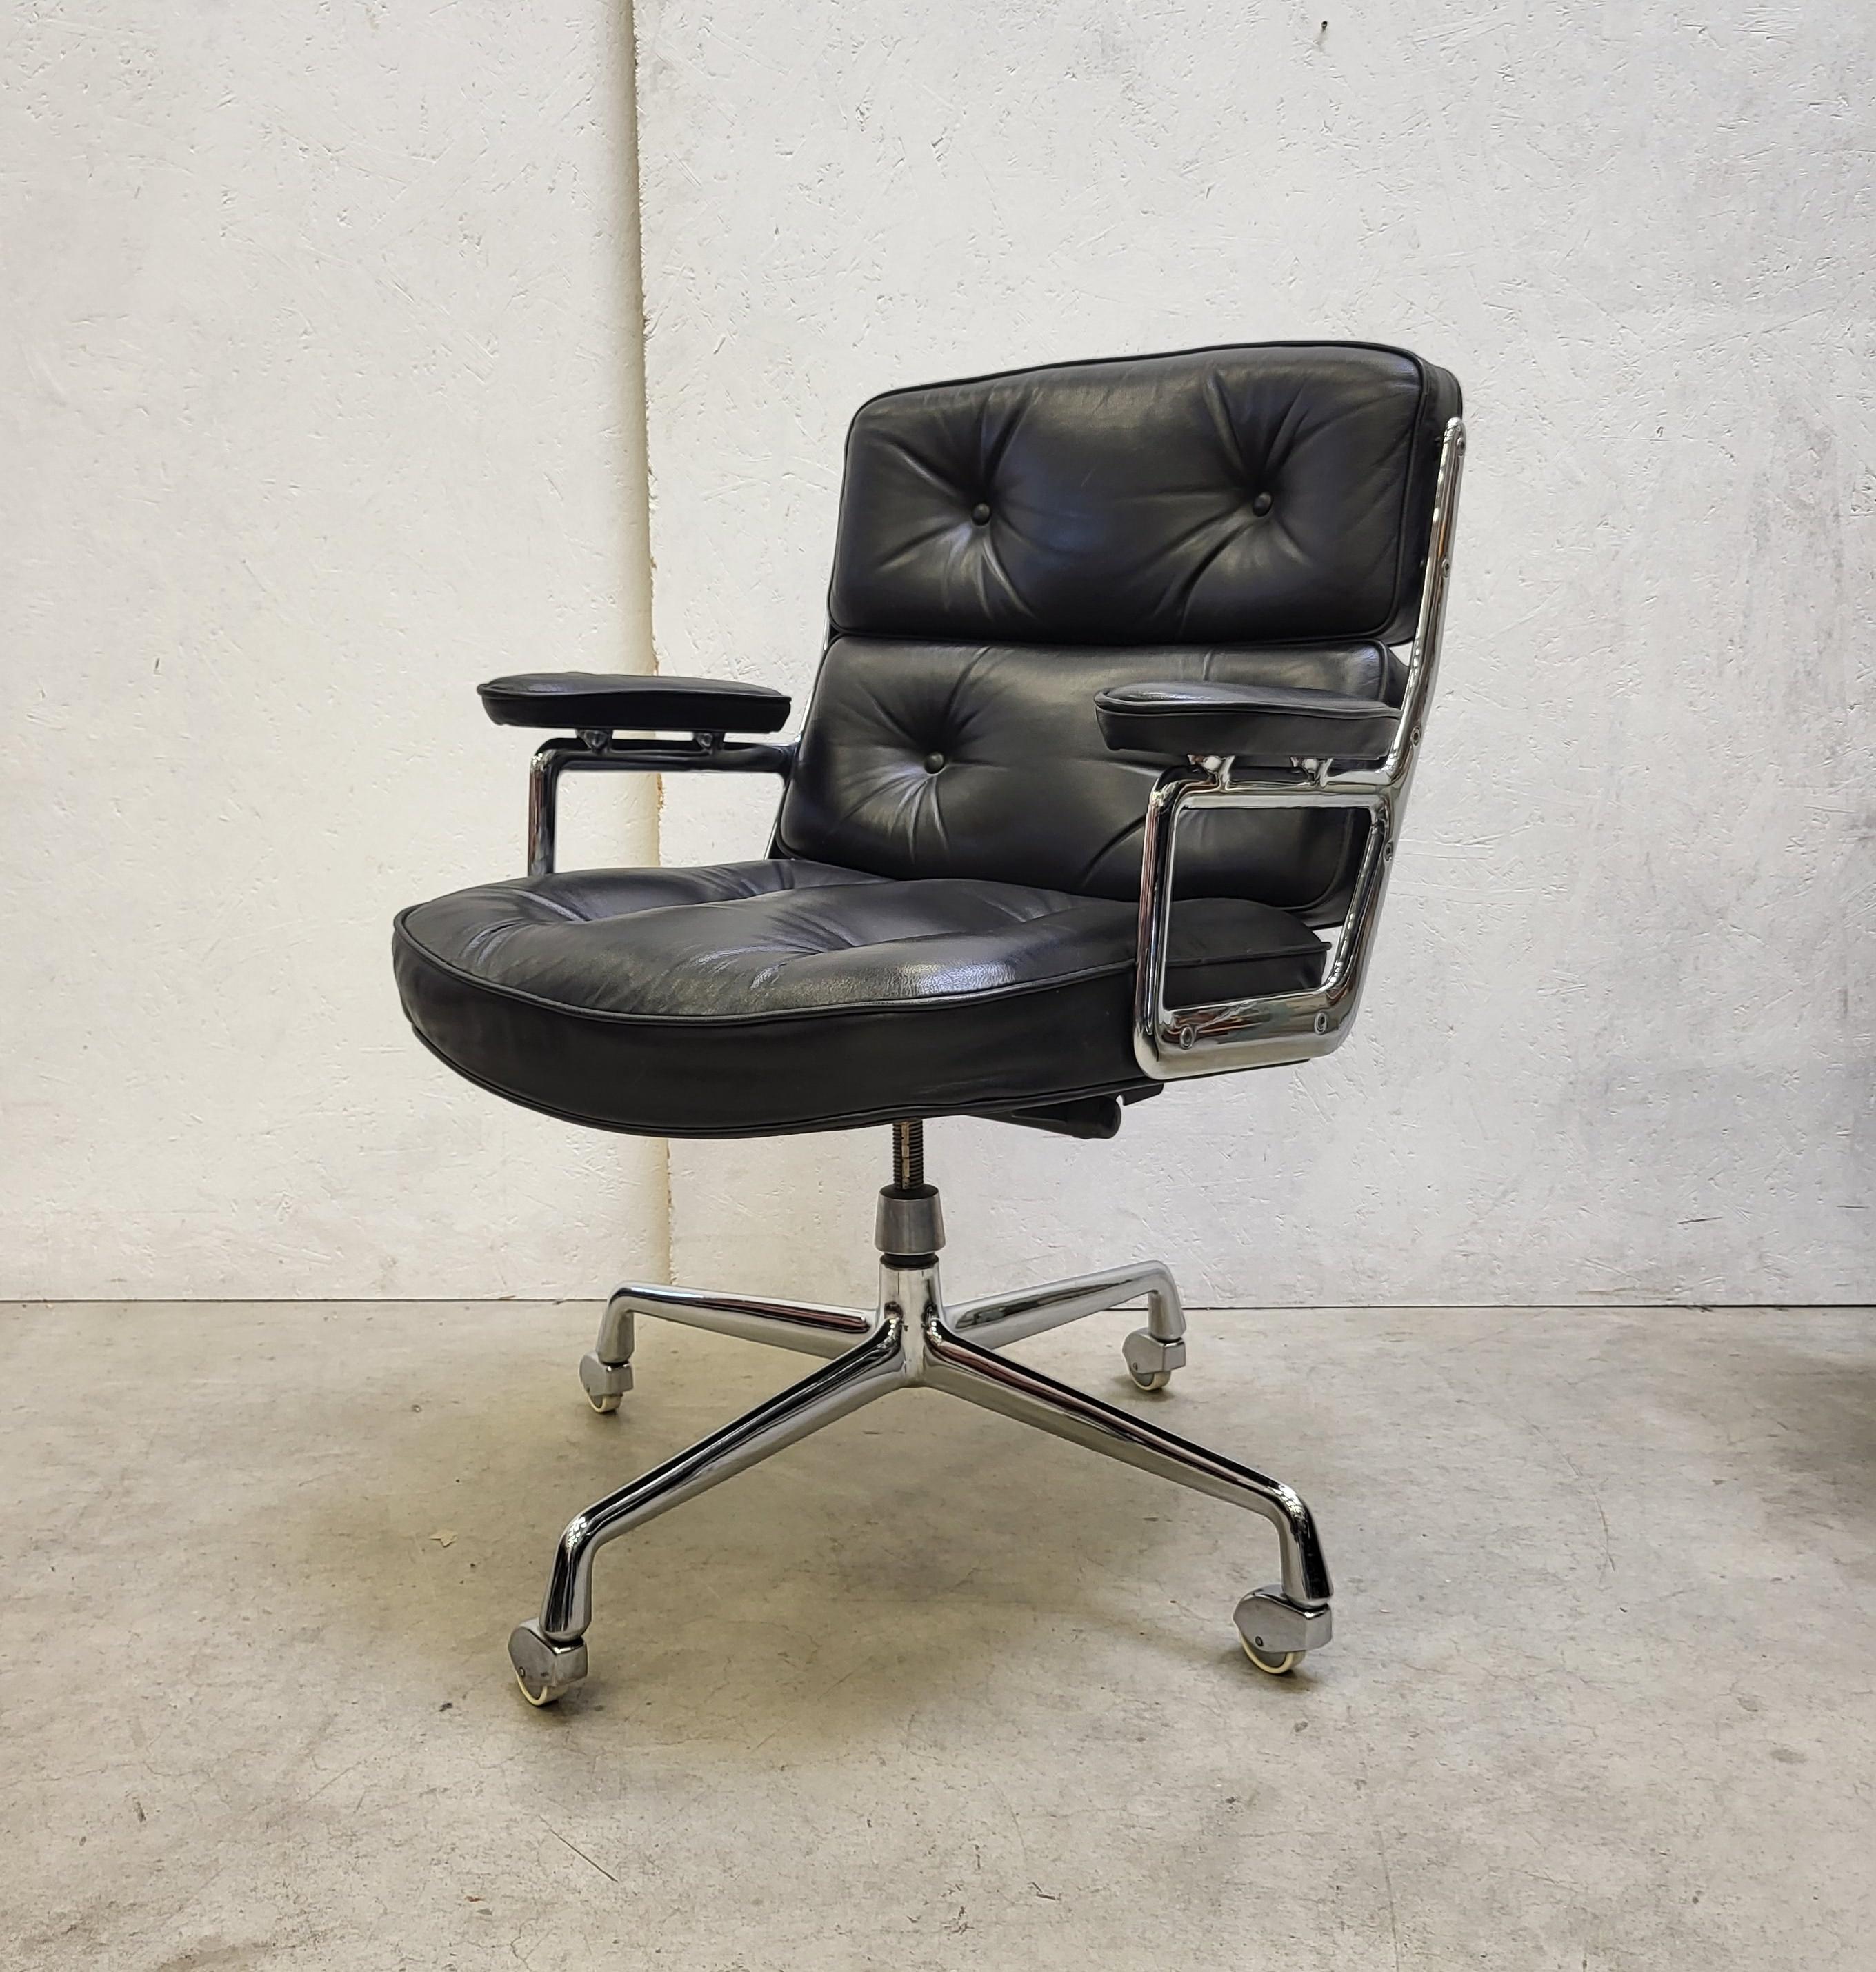 Aluminum Herman Miller ES104 Time Life Lobby Office Chair by Charles Eames